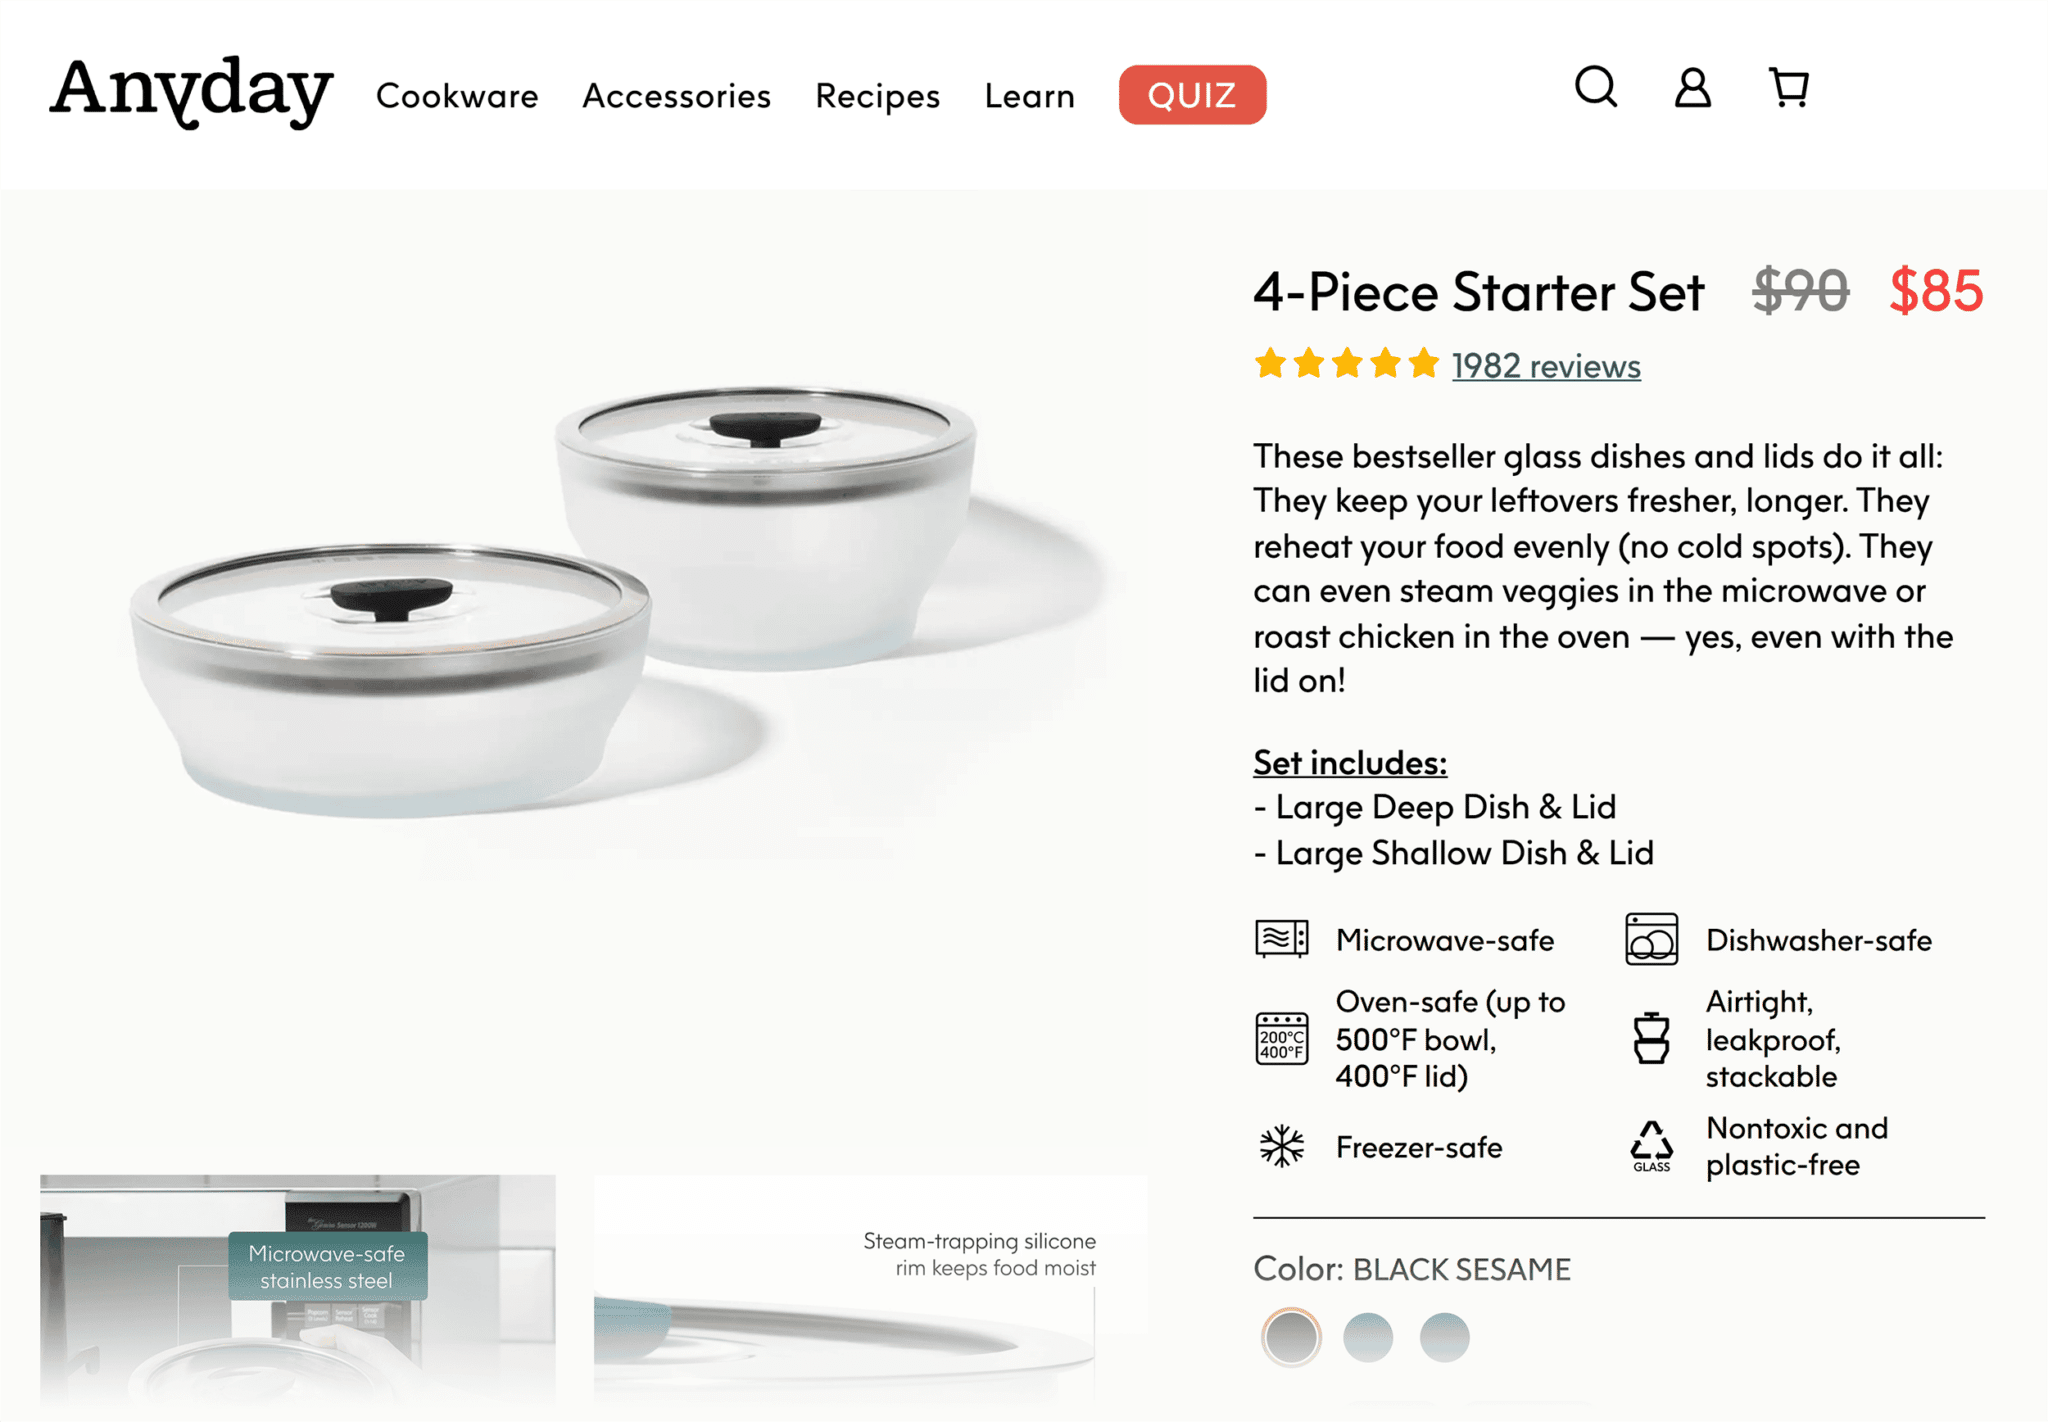 anyday-the-starter-set 20 Effective Product Page Examples (+ Best Practices)